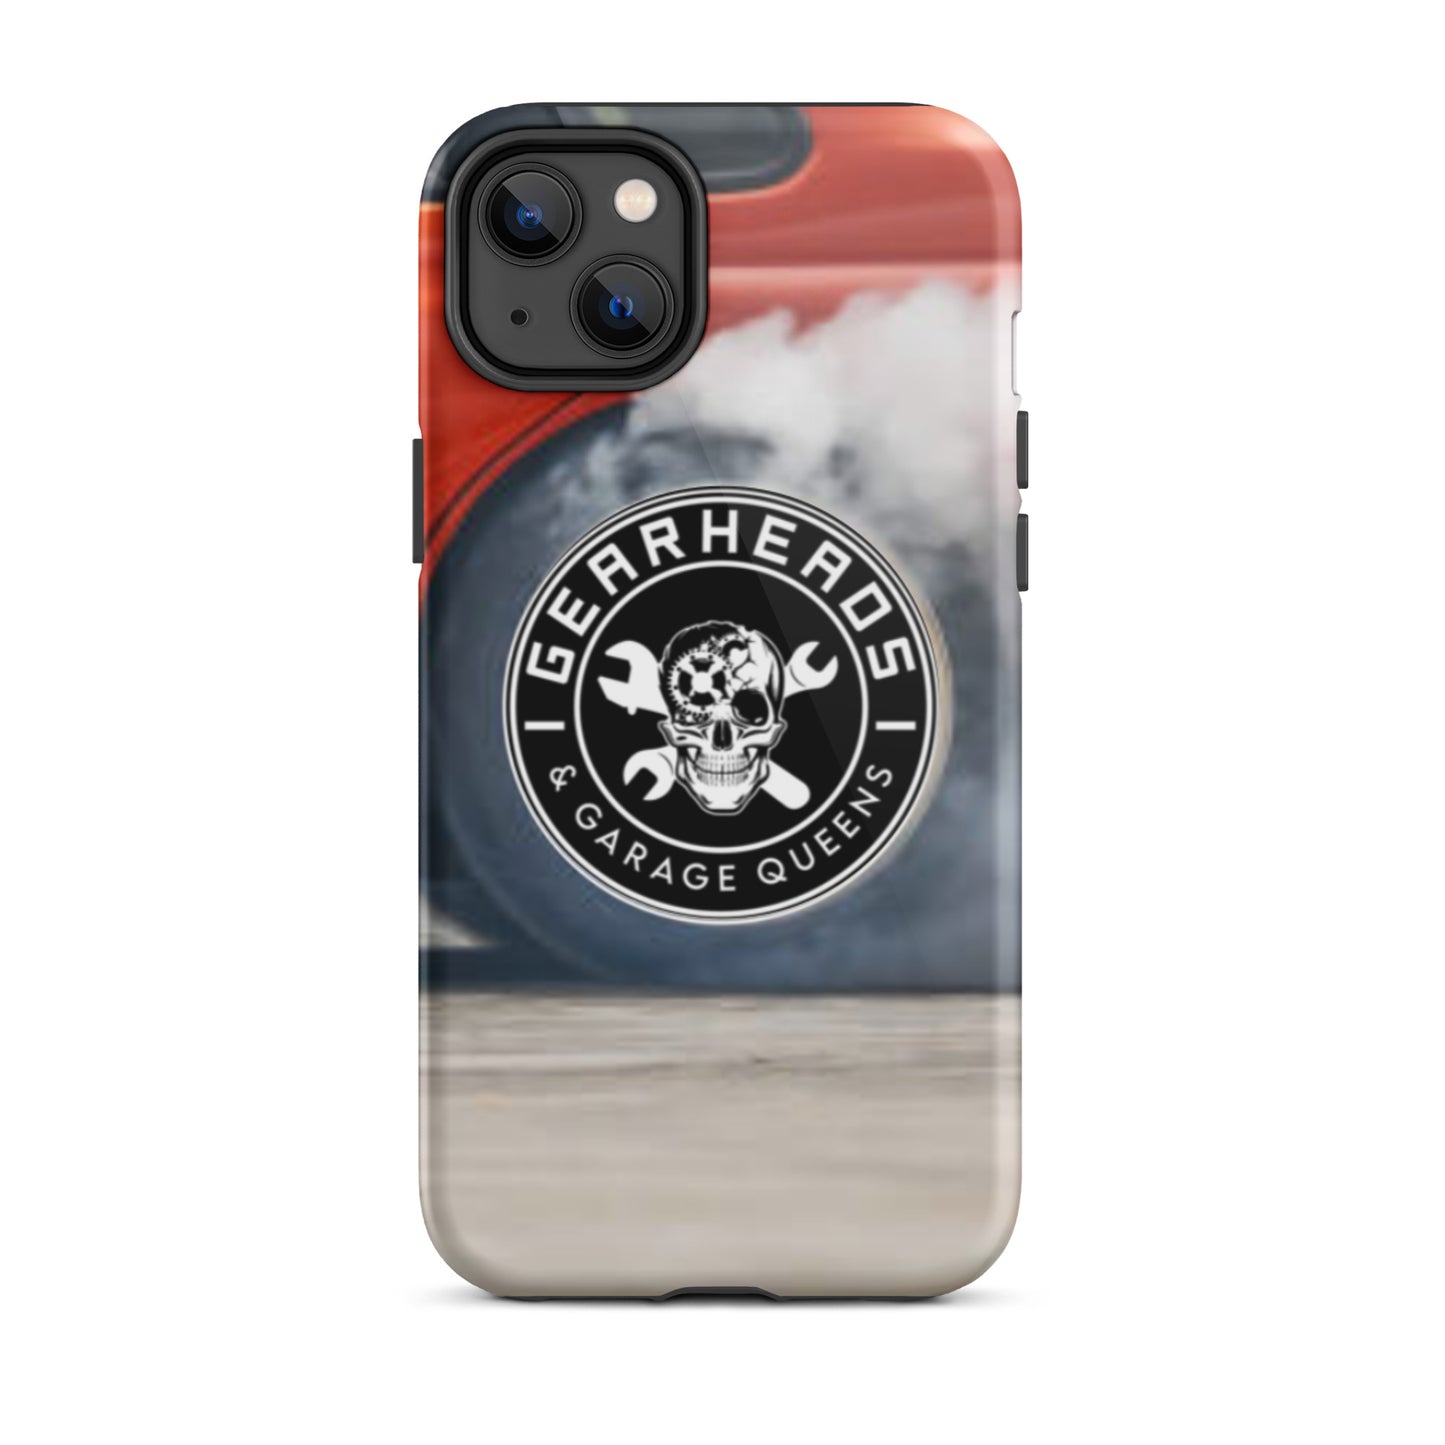 Gearheads and Garage Queens - Tough iPhone case